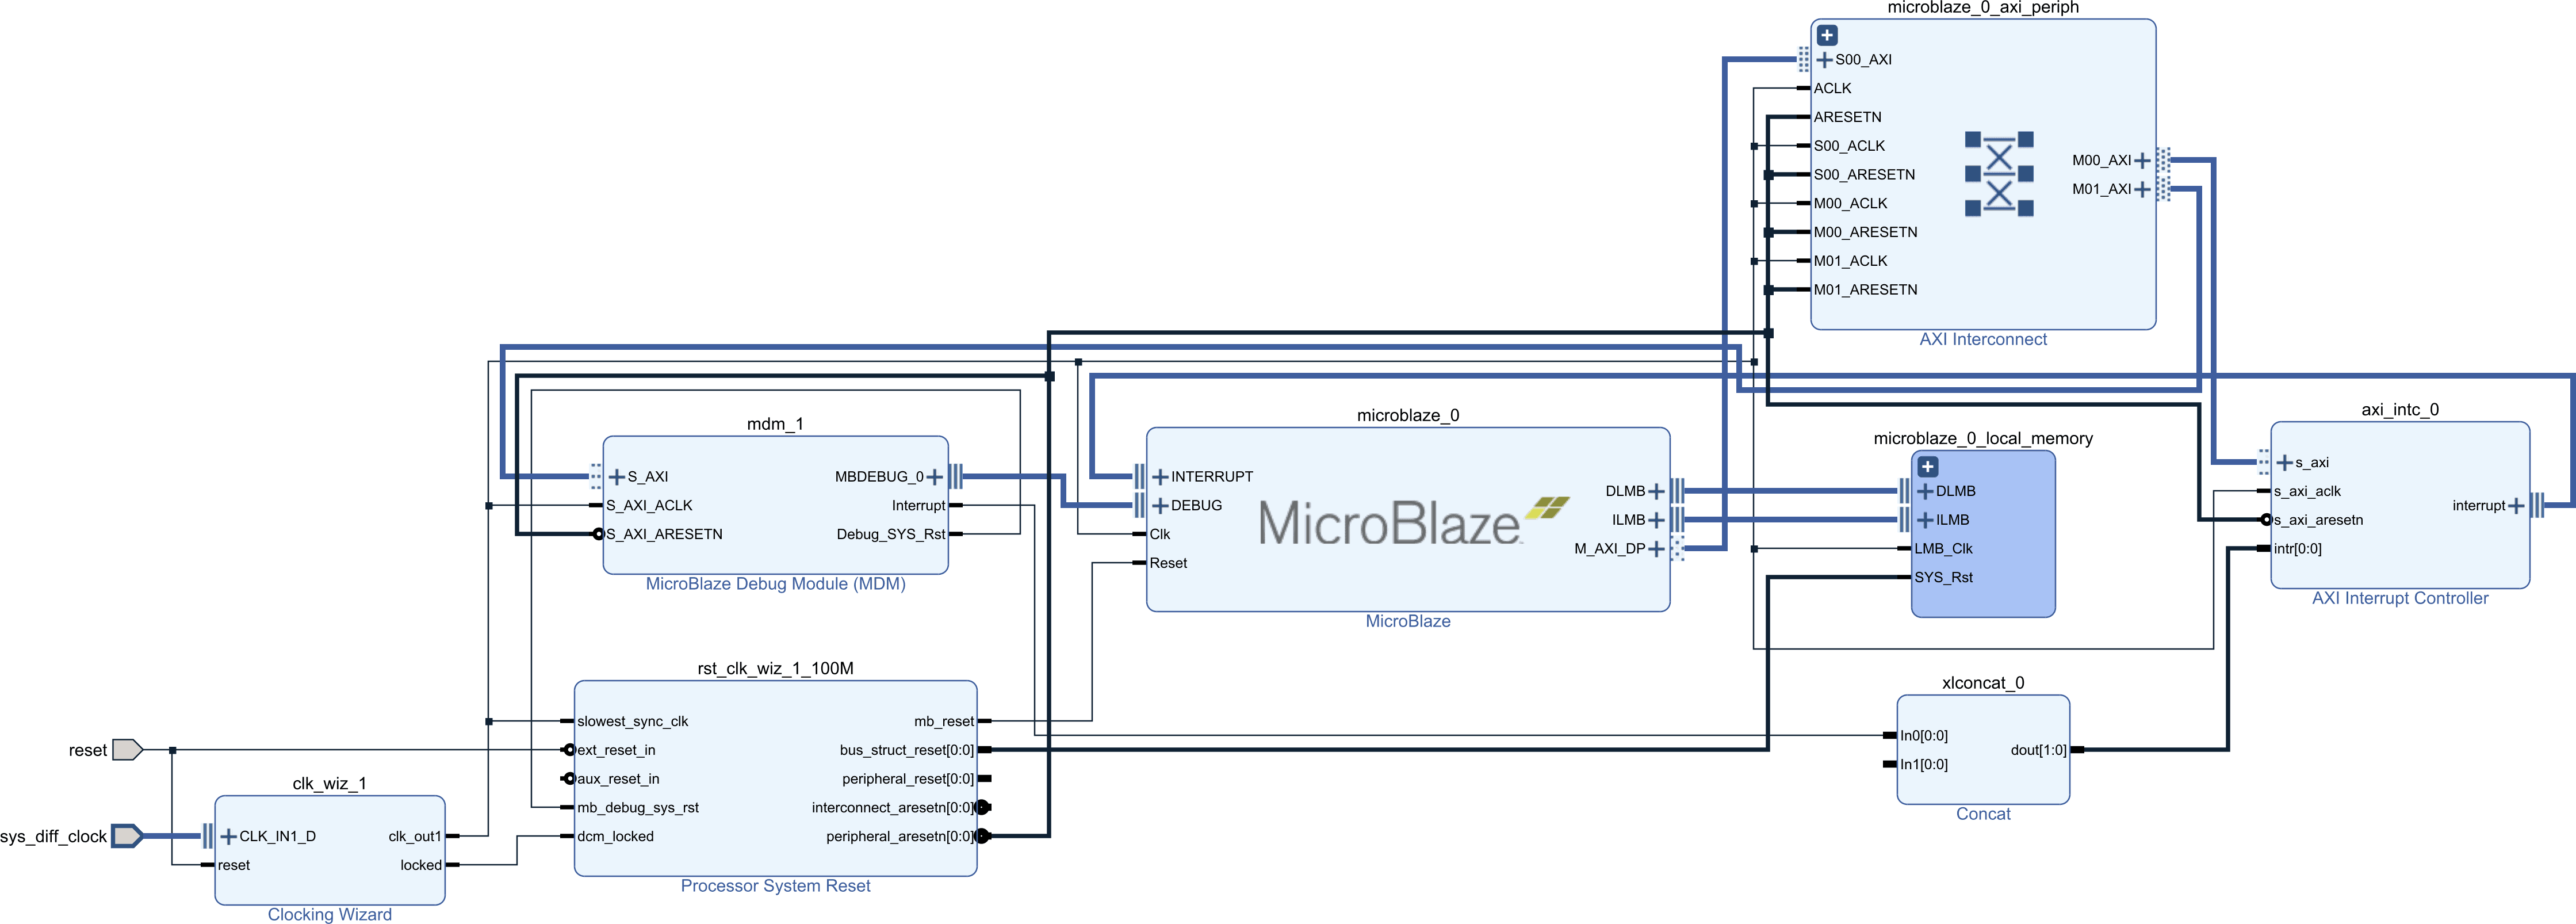 Block diagram of a MicroBlaze system using local memory for the data and instruction storage.